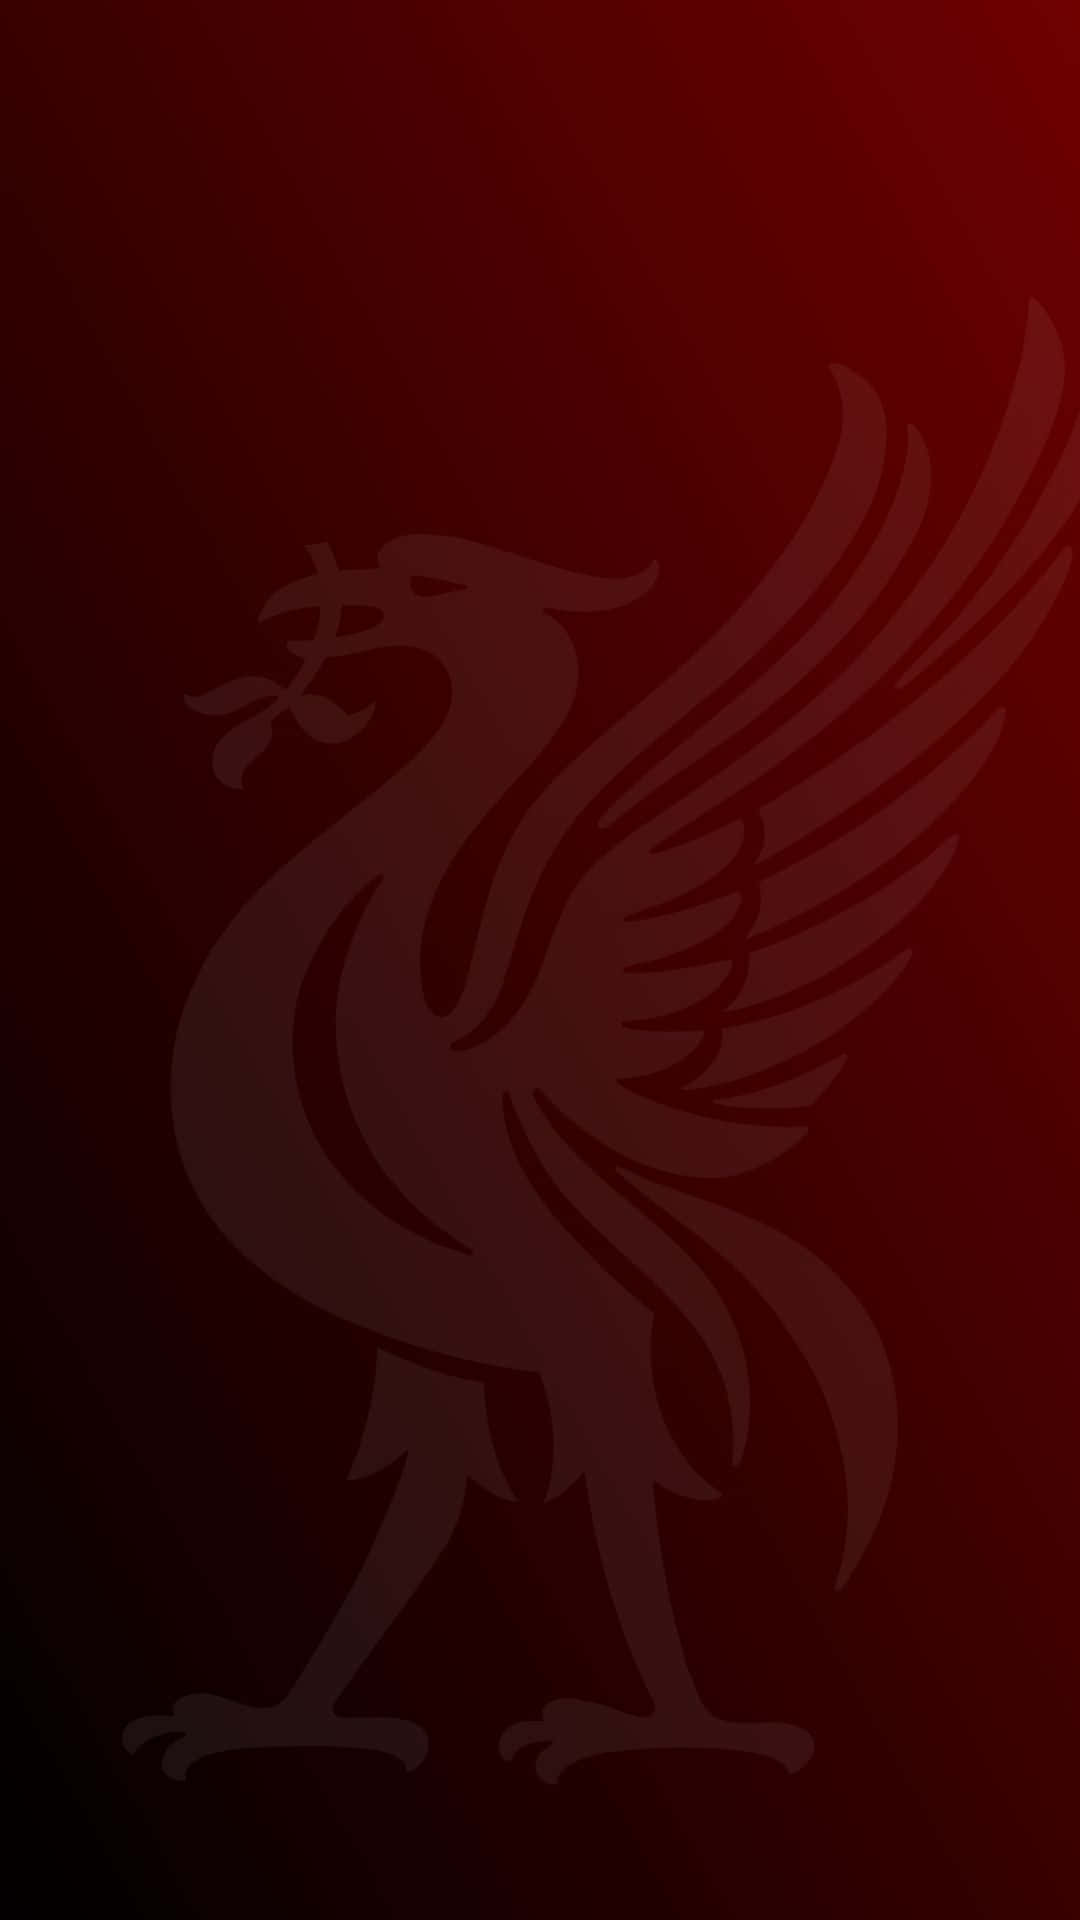 Liverpool fans praising the power of their iPhones! Wallpaper